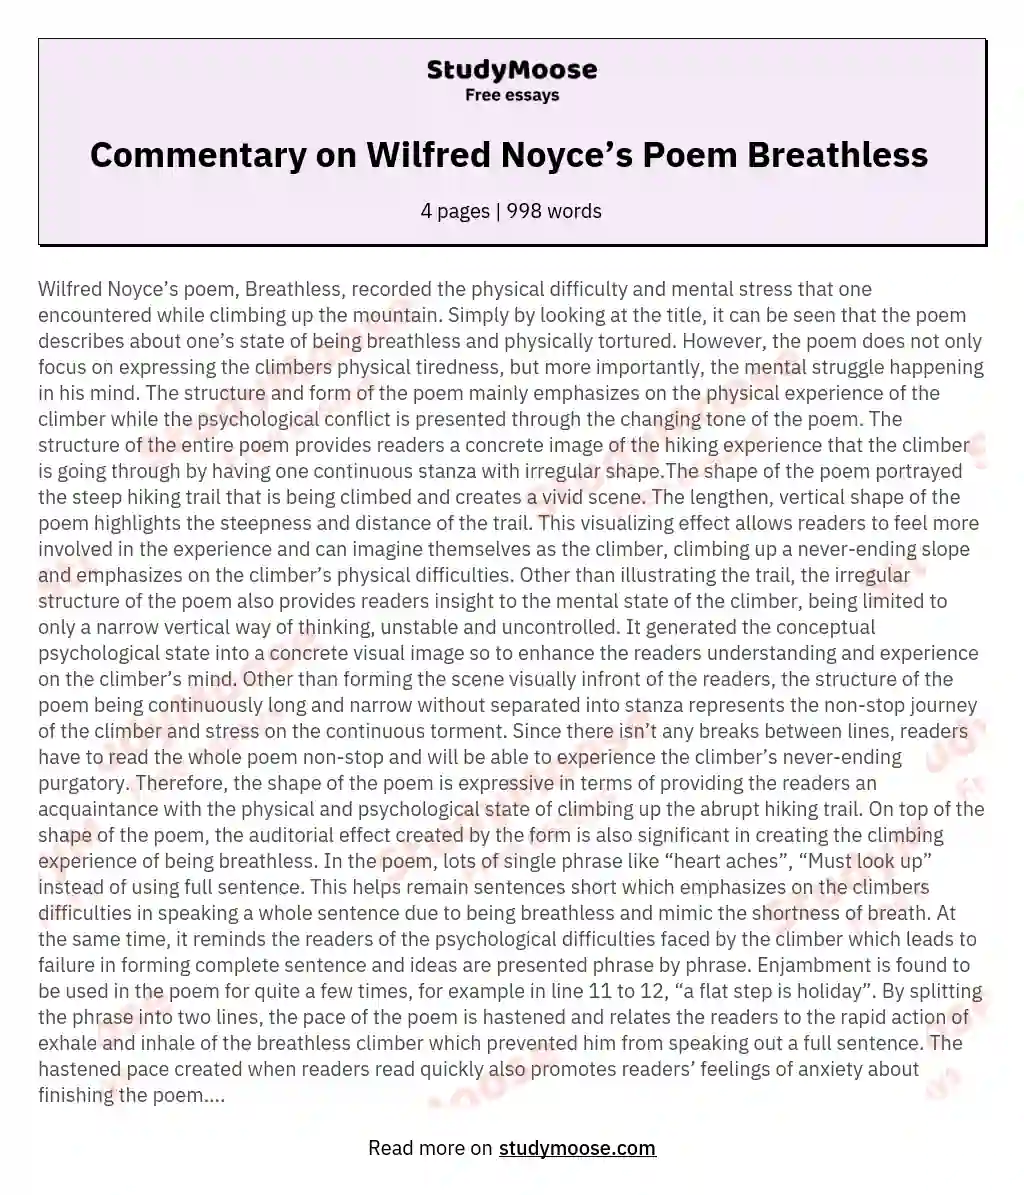 Commentary on Wilfred Noyce’s Poem Breathless  essay